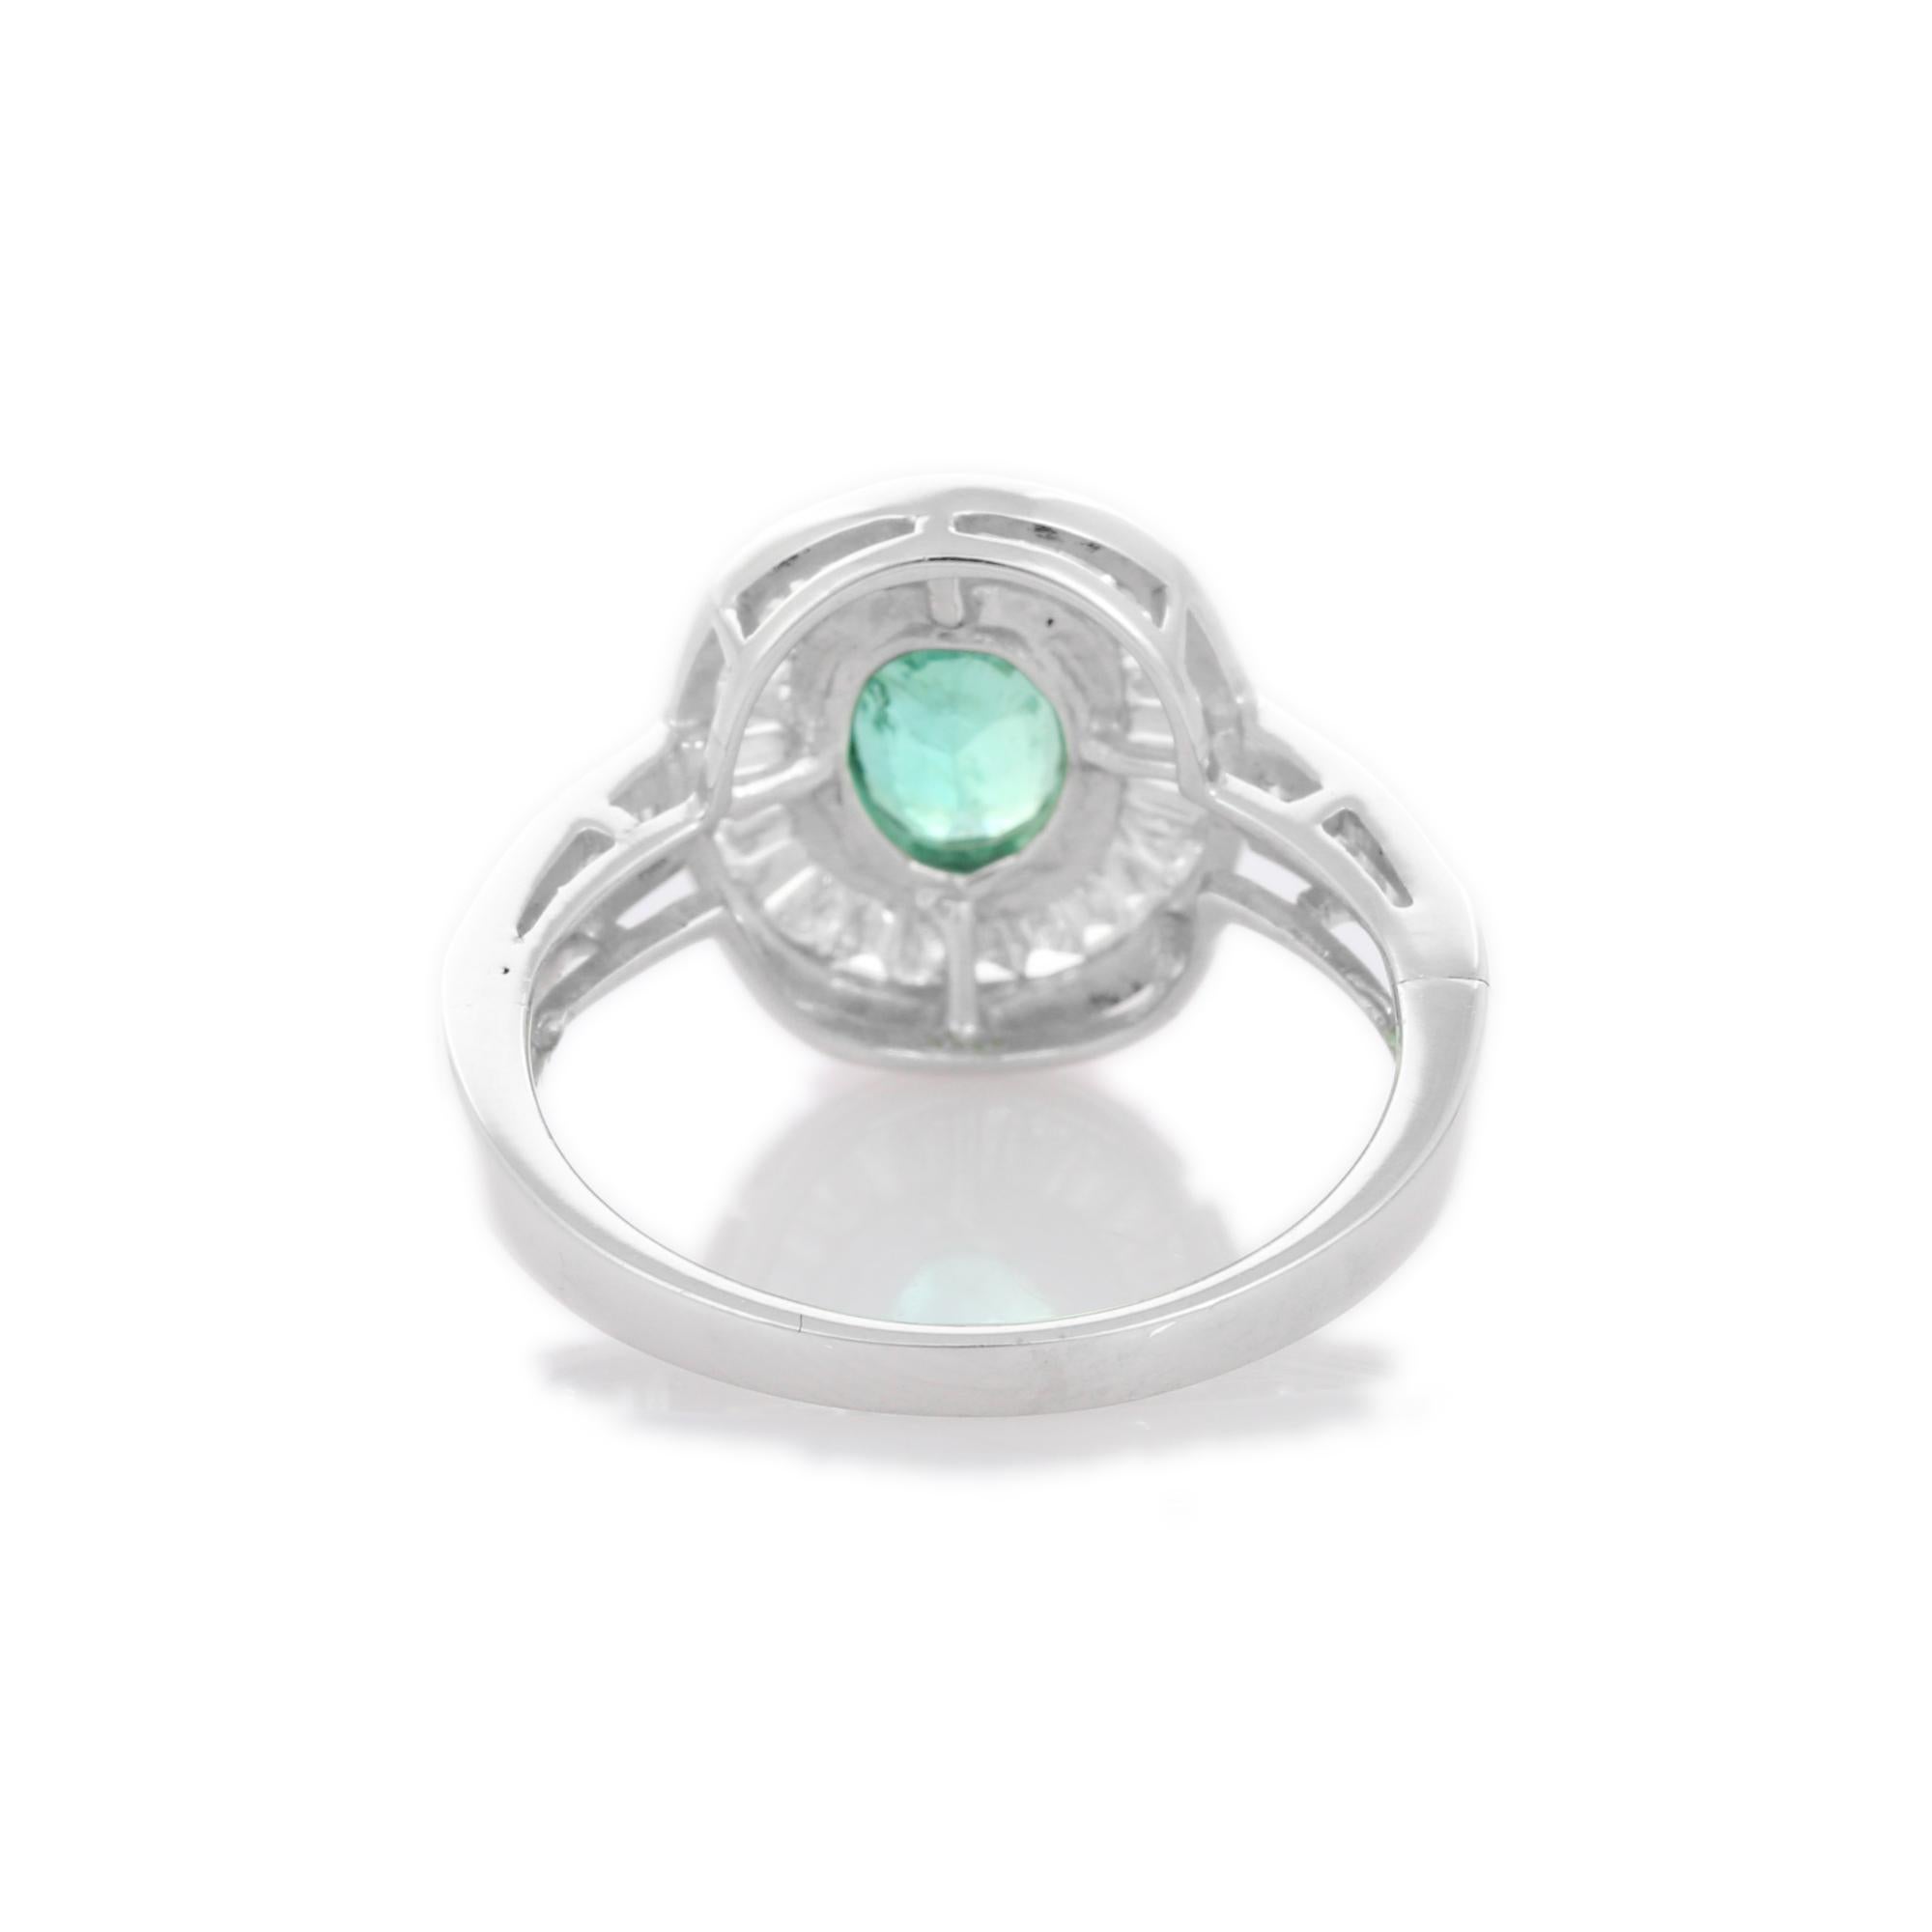 For Sale:  1.56 Carat Emerald Cocktail Ring with Halo of Diamonds in 18K White Gold  6